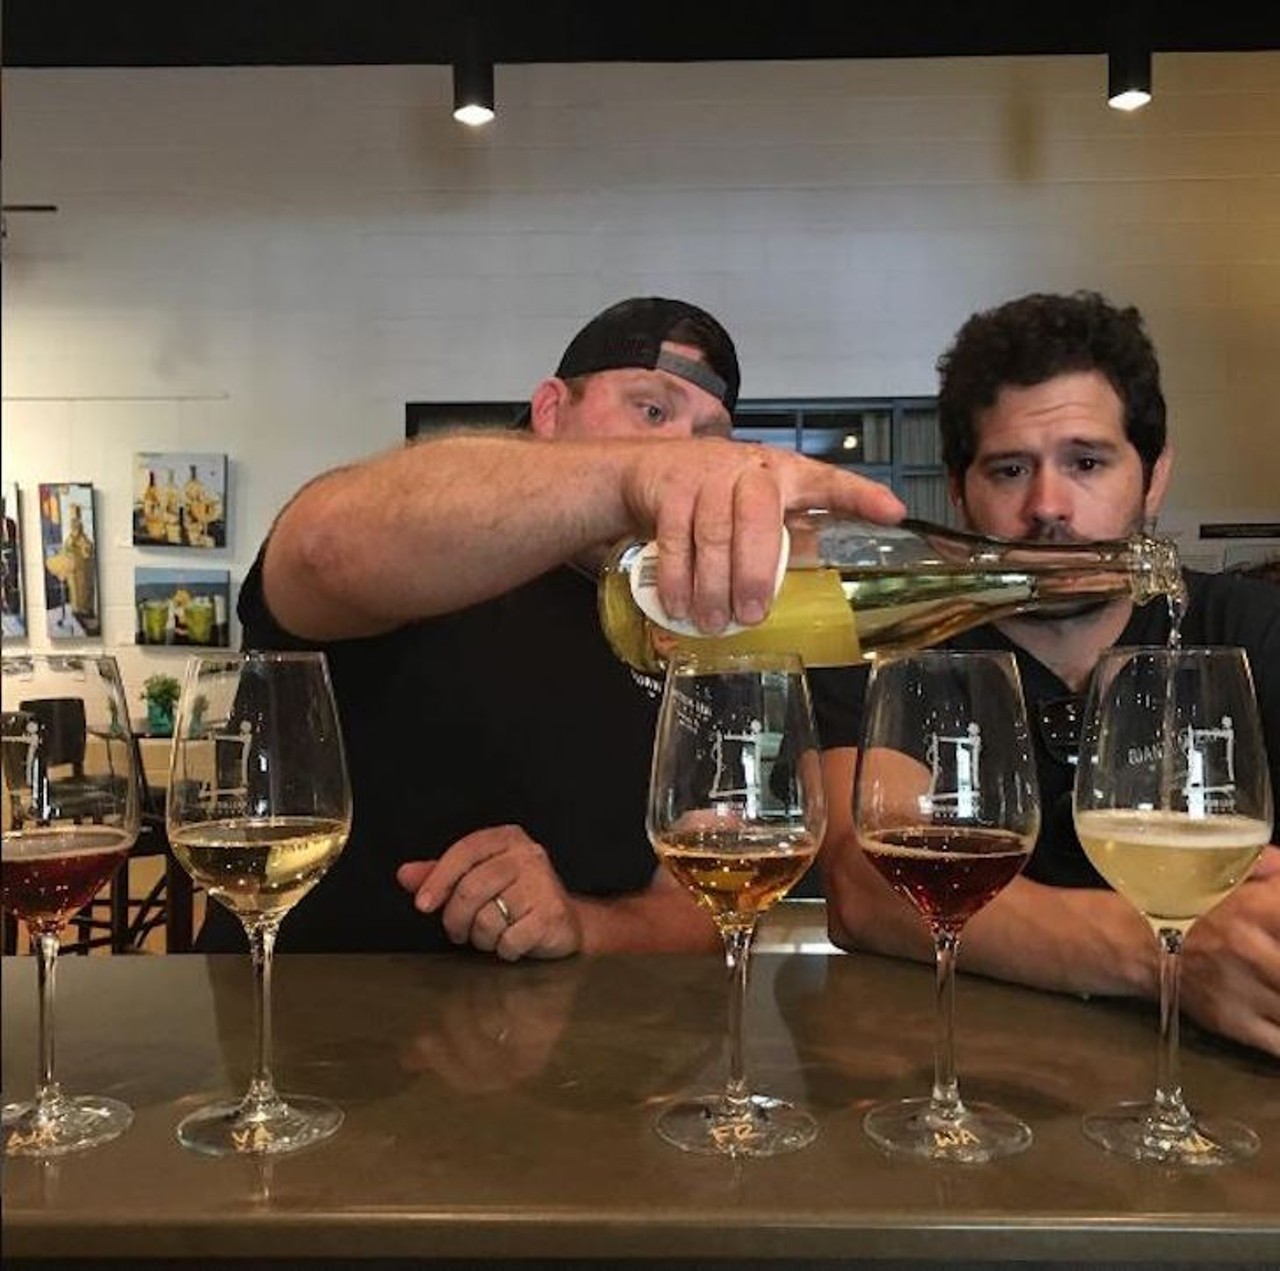 Sip on $5 wine flights at Quantum Leap
1312 Wilfred Drive Orlando, FL 32803, 407-730-3082
Did someone say day drinking? Quantum Leap has $5 wine flights if you feel like trying new drinks with some friends.
Photo via quantumleapwinery/Instagram